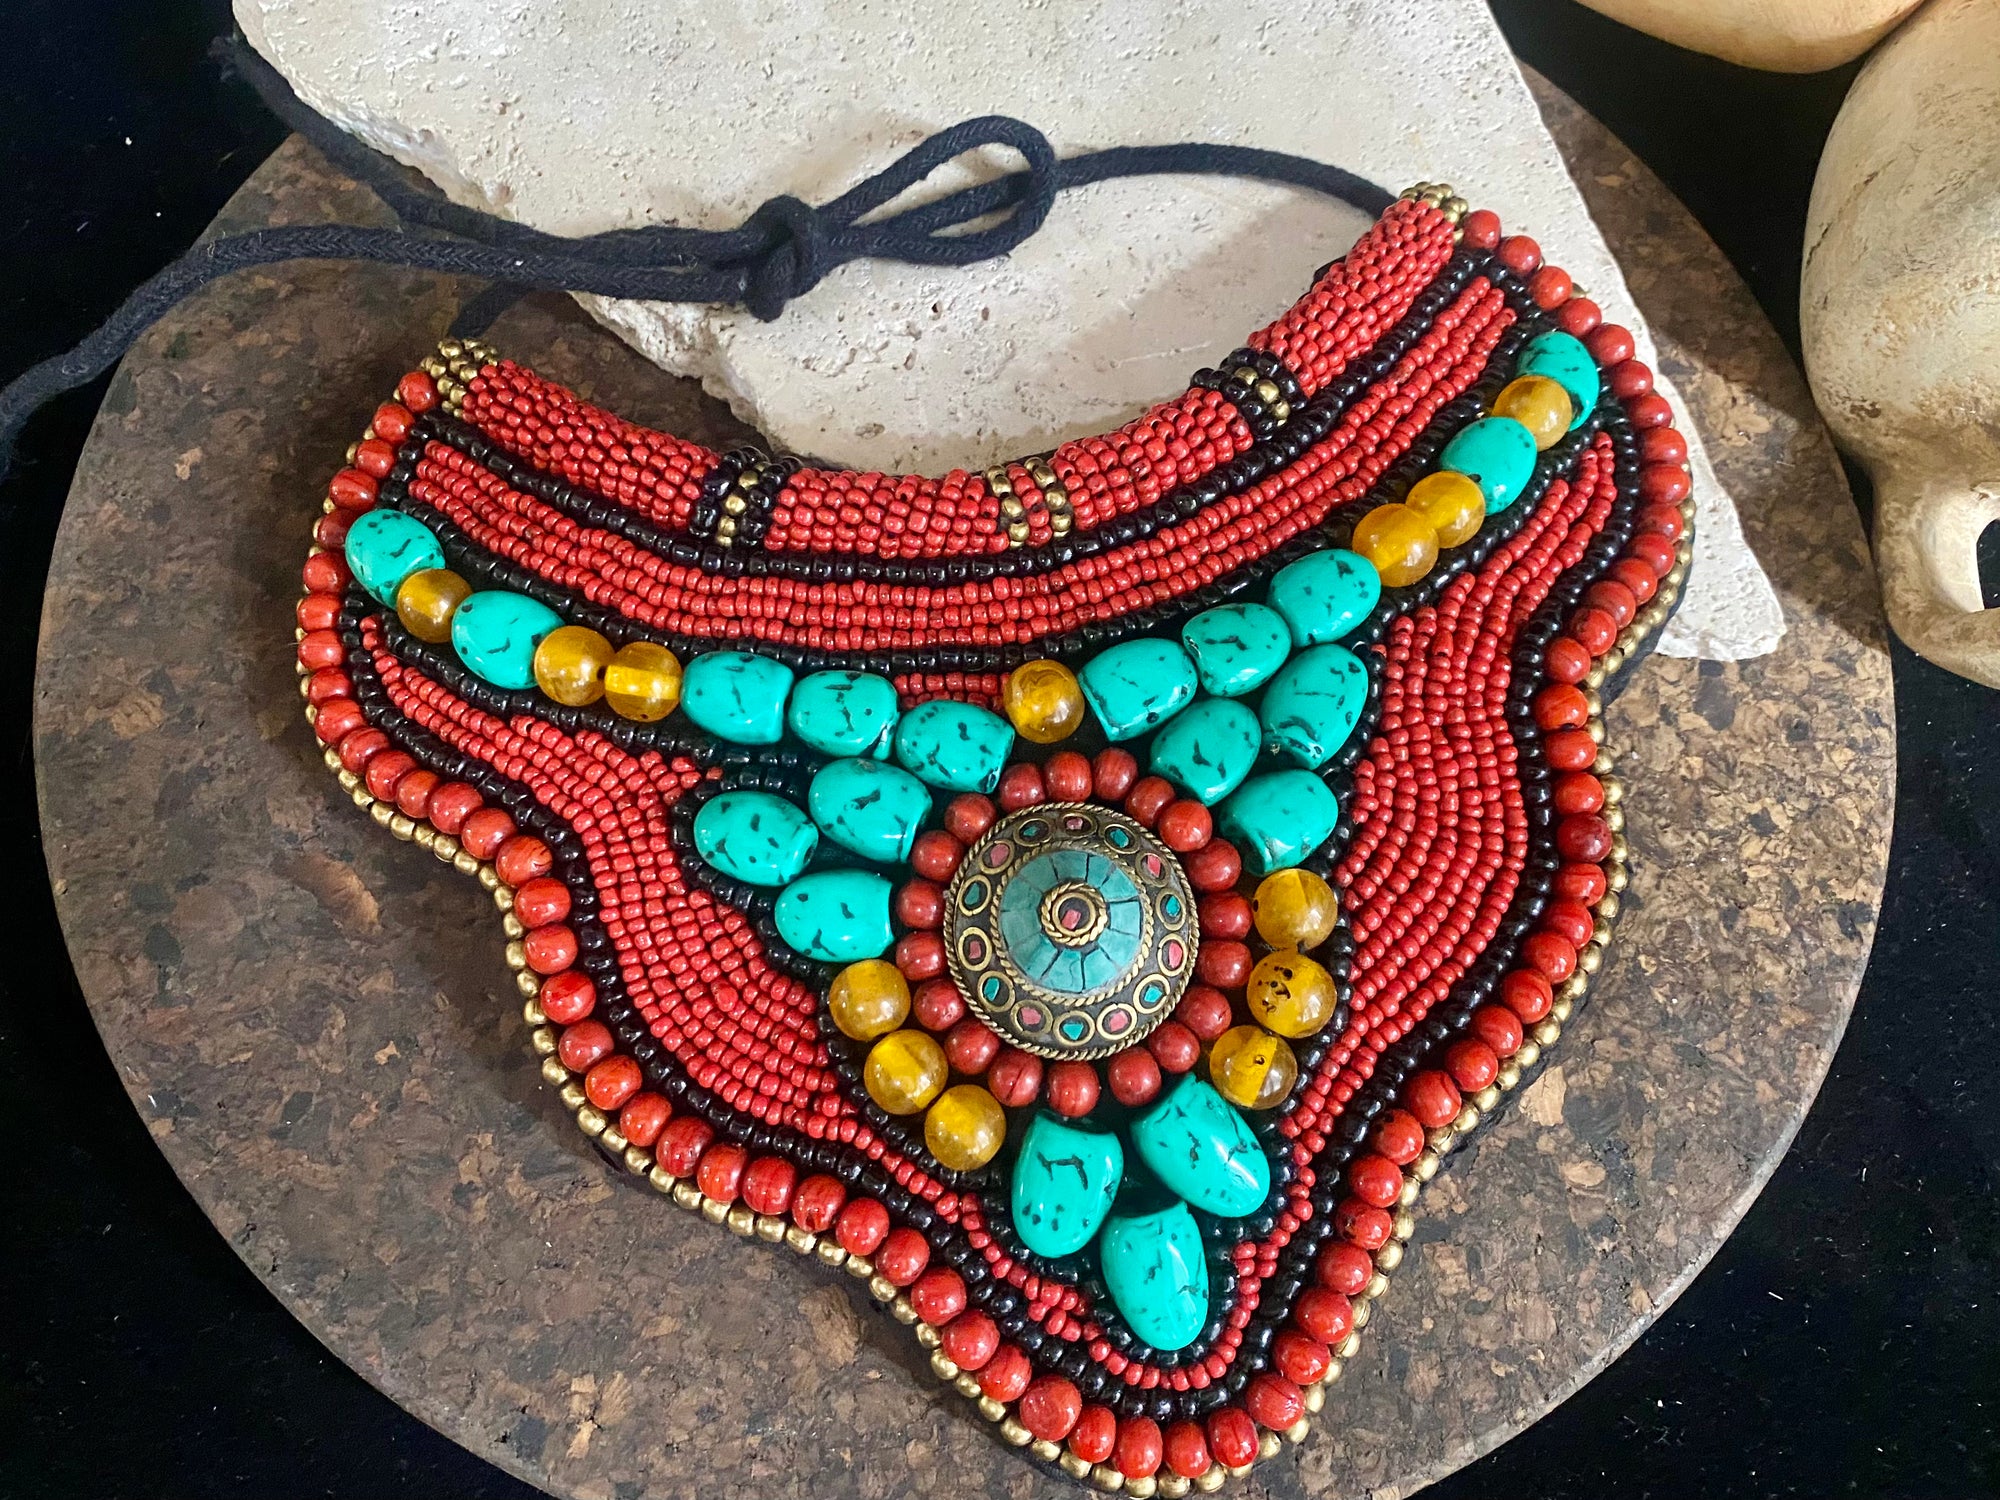 Traditional bib or pectoral beaded necklace, with a multitude of colourful ceramic and resin stones sewn onto a stiff fabric background and tied around the neck with a cord. Sikkim jewellery, India